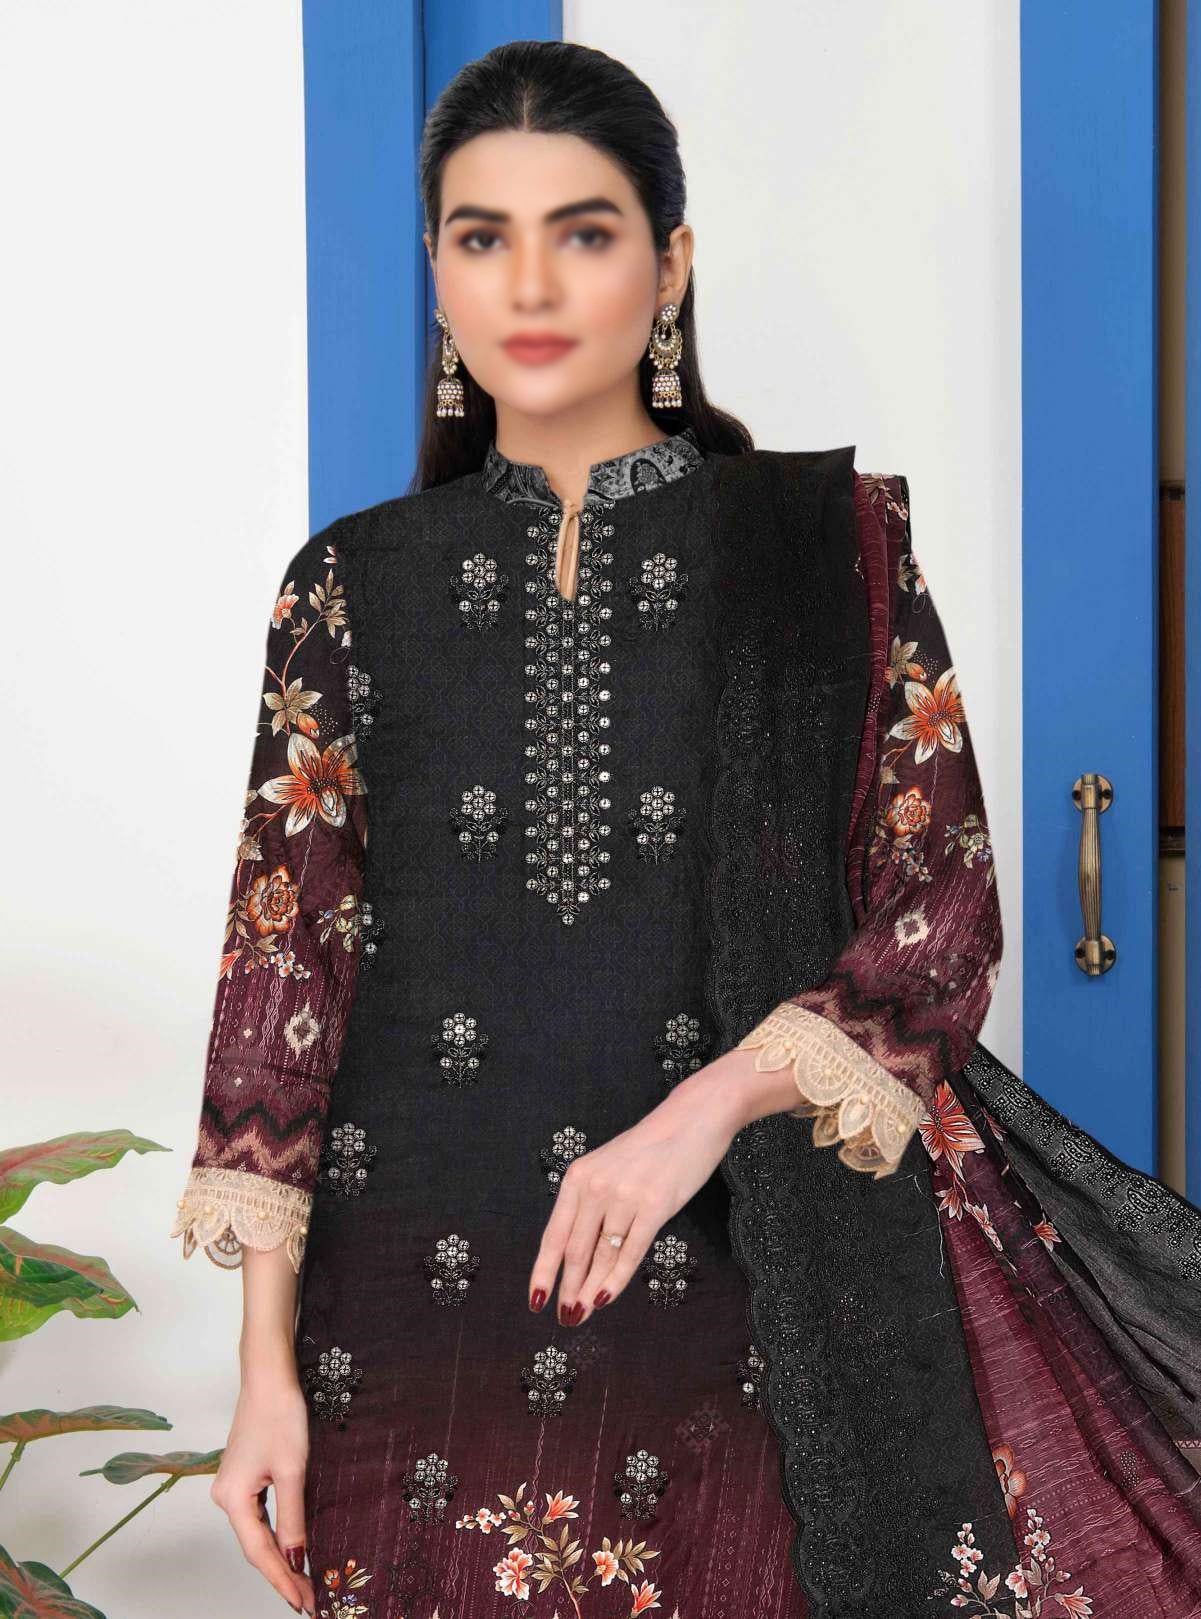 D-06 Zunaira Luxury Embroidered Lawn Coll"23 By )Sobia Waseem) Un-Stitched 3 Piece